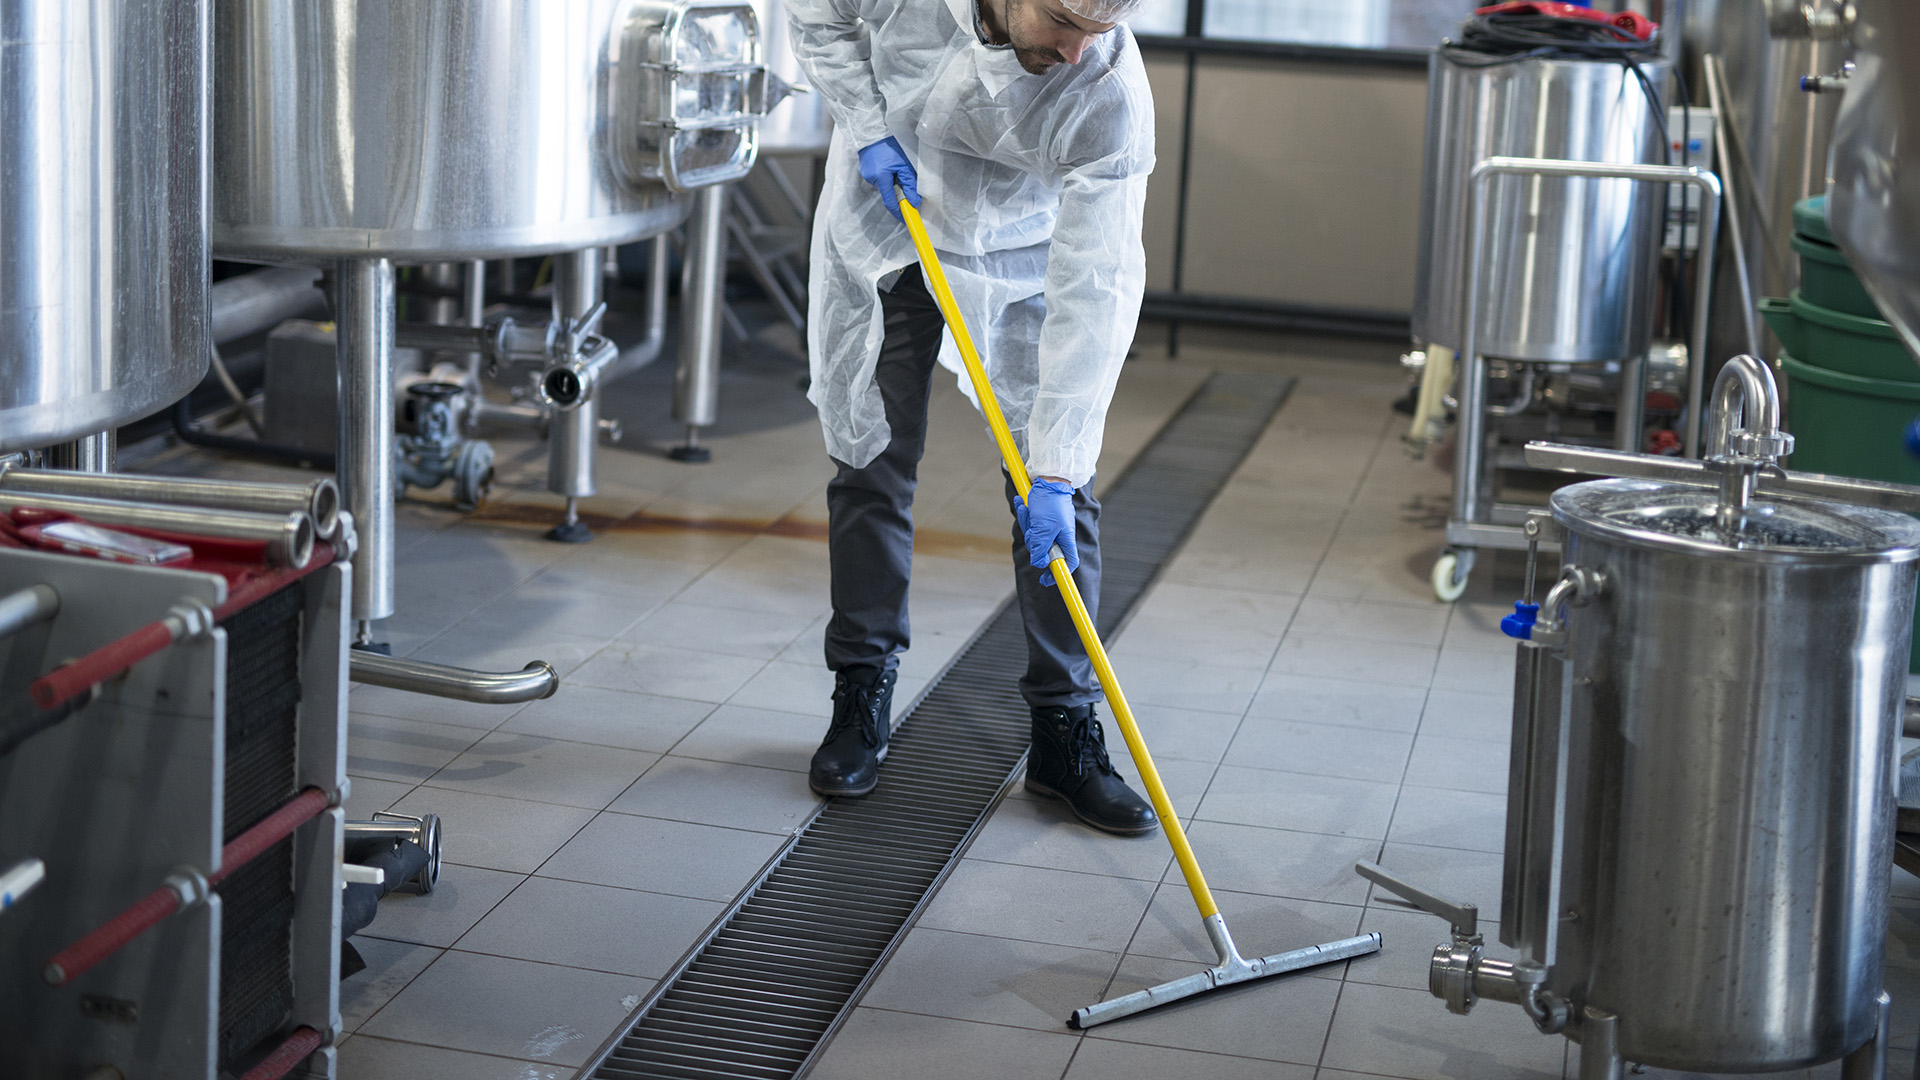 Professional cleaner wearing protection uniform cleaning floor of production plant.